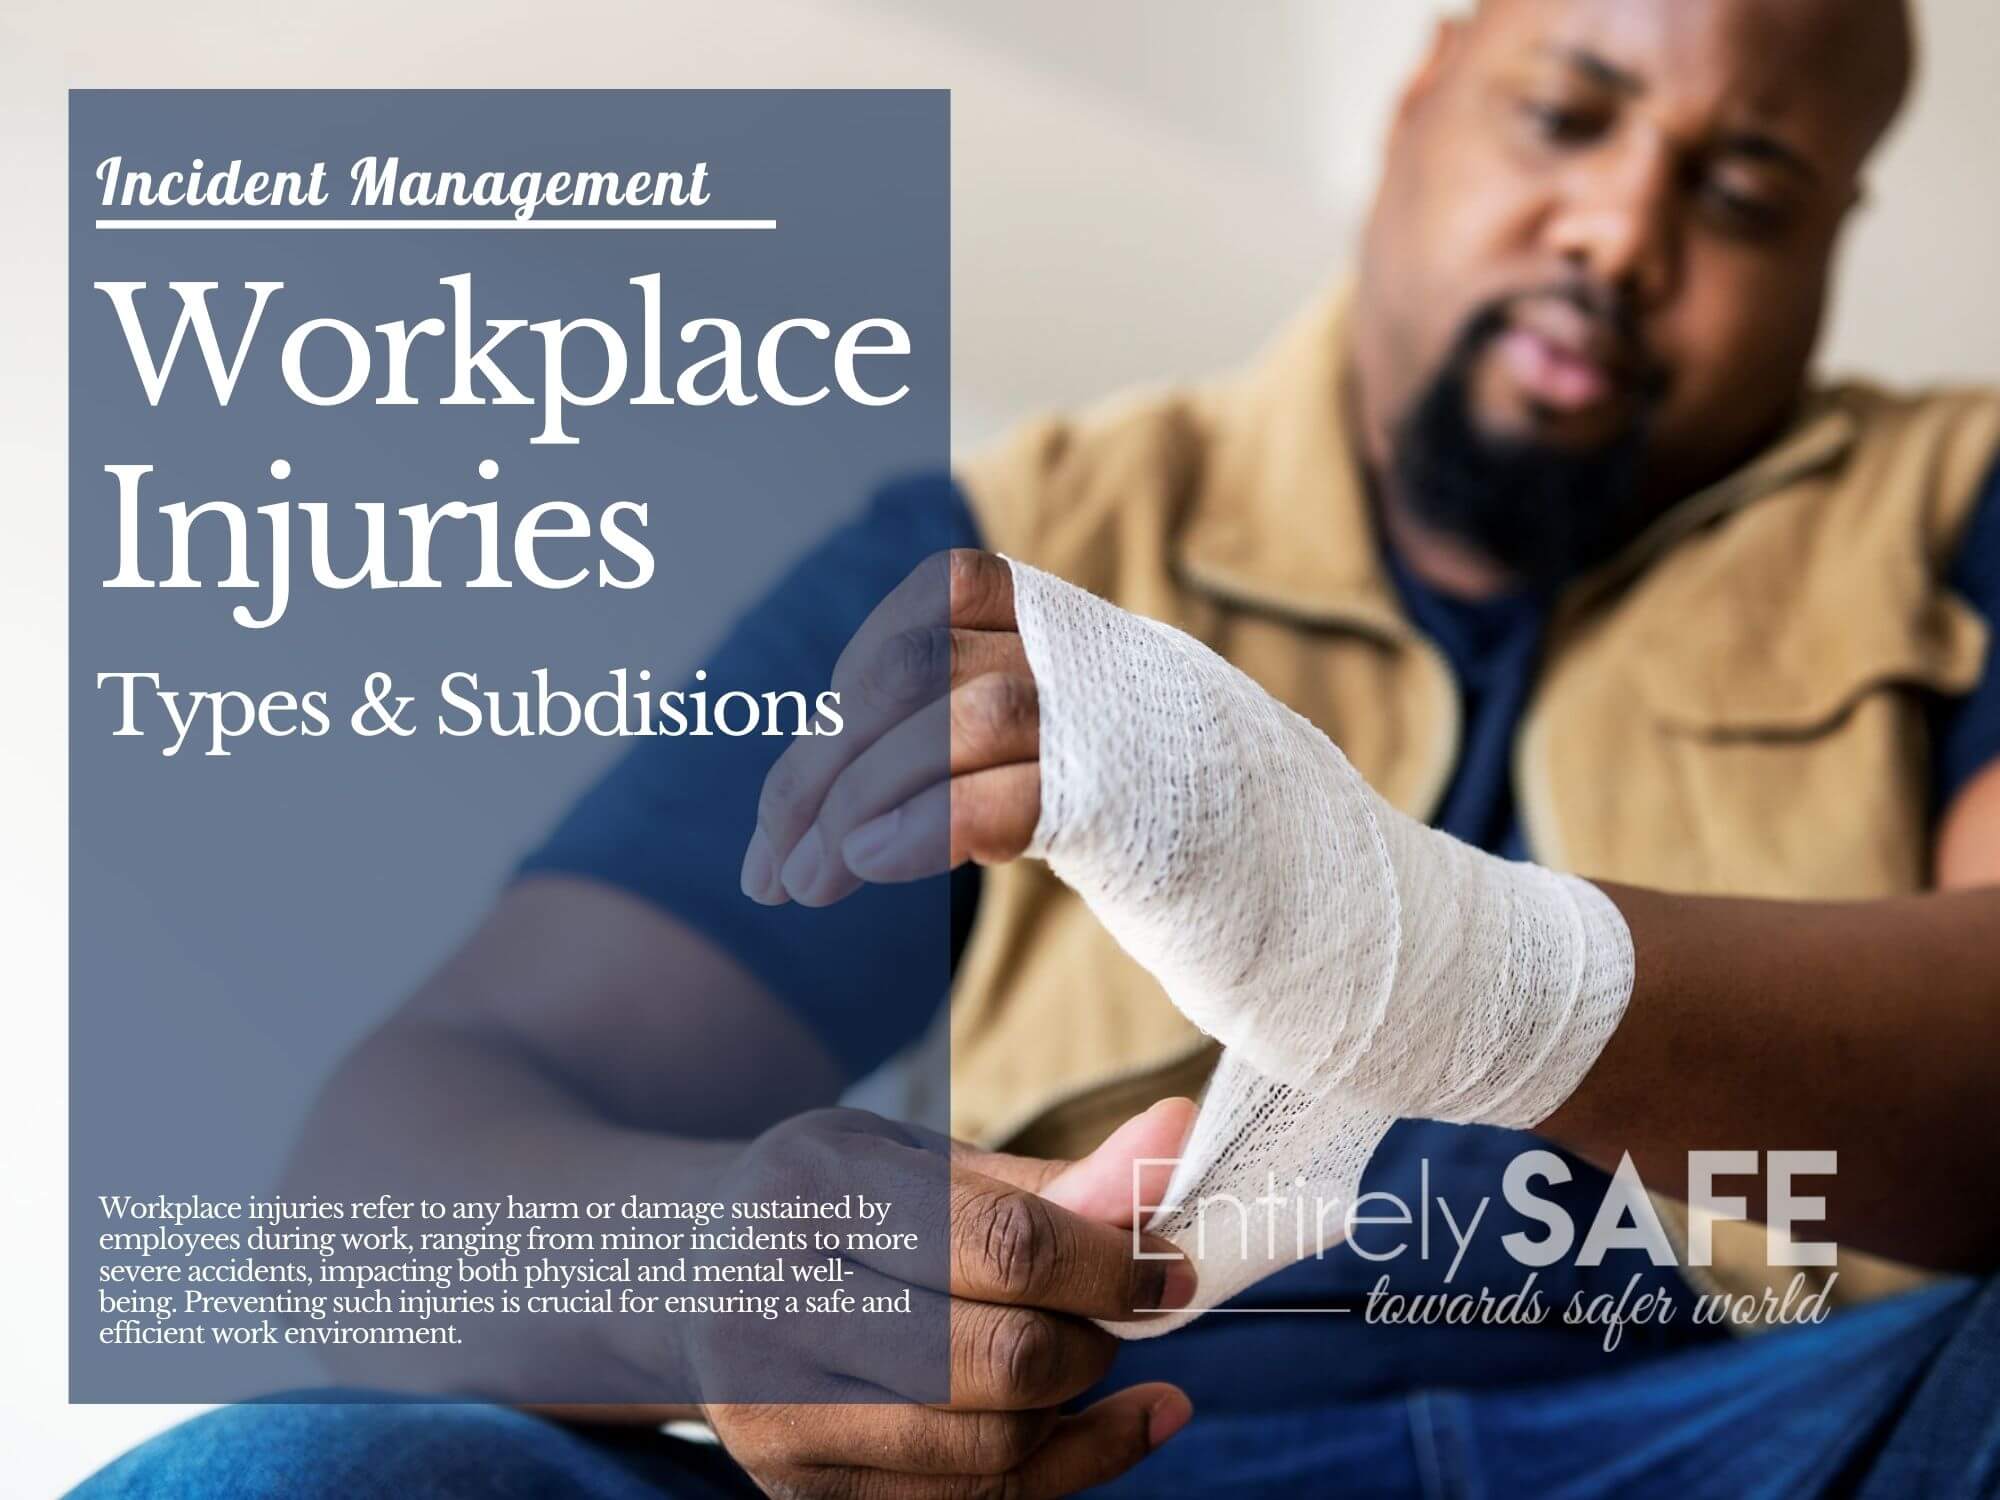 Types, Subdivisions of Workplace Injuries